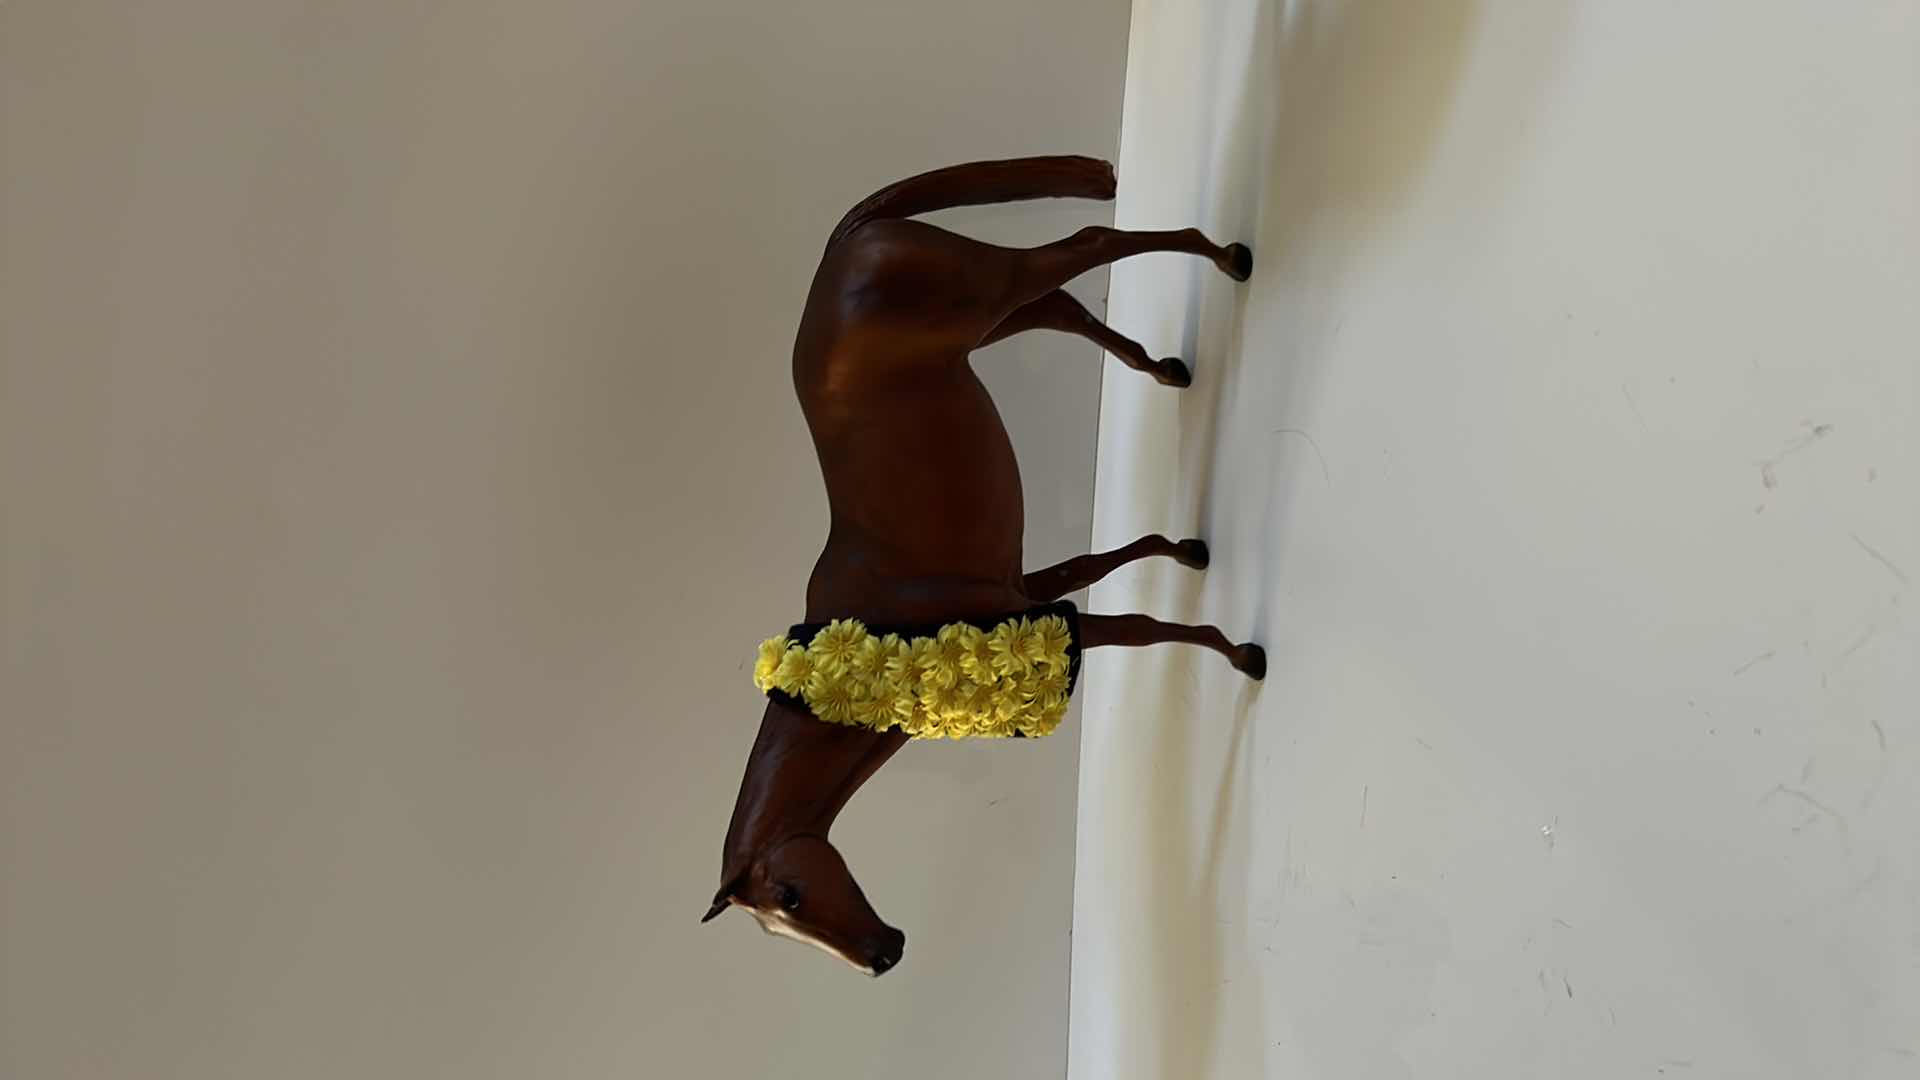 Photo 3 of 3 BREYER COLLECTIBLE HORSES TALLEST 8.5"